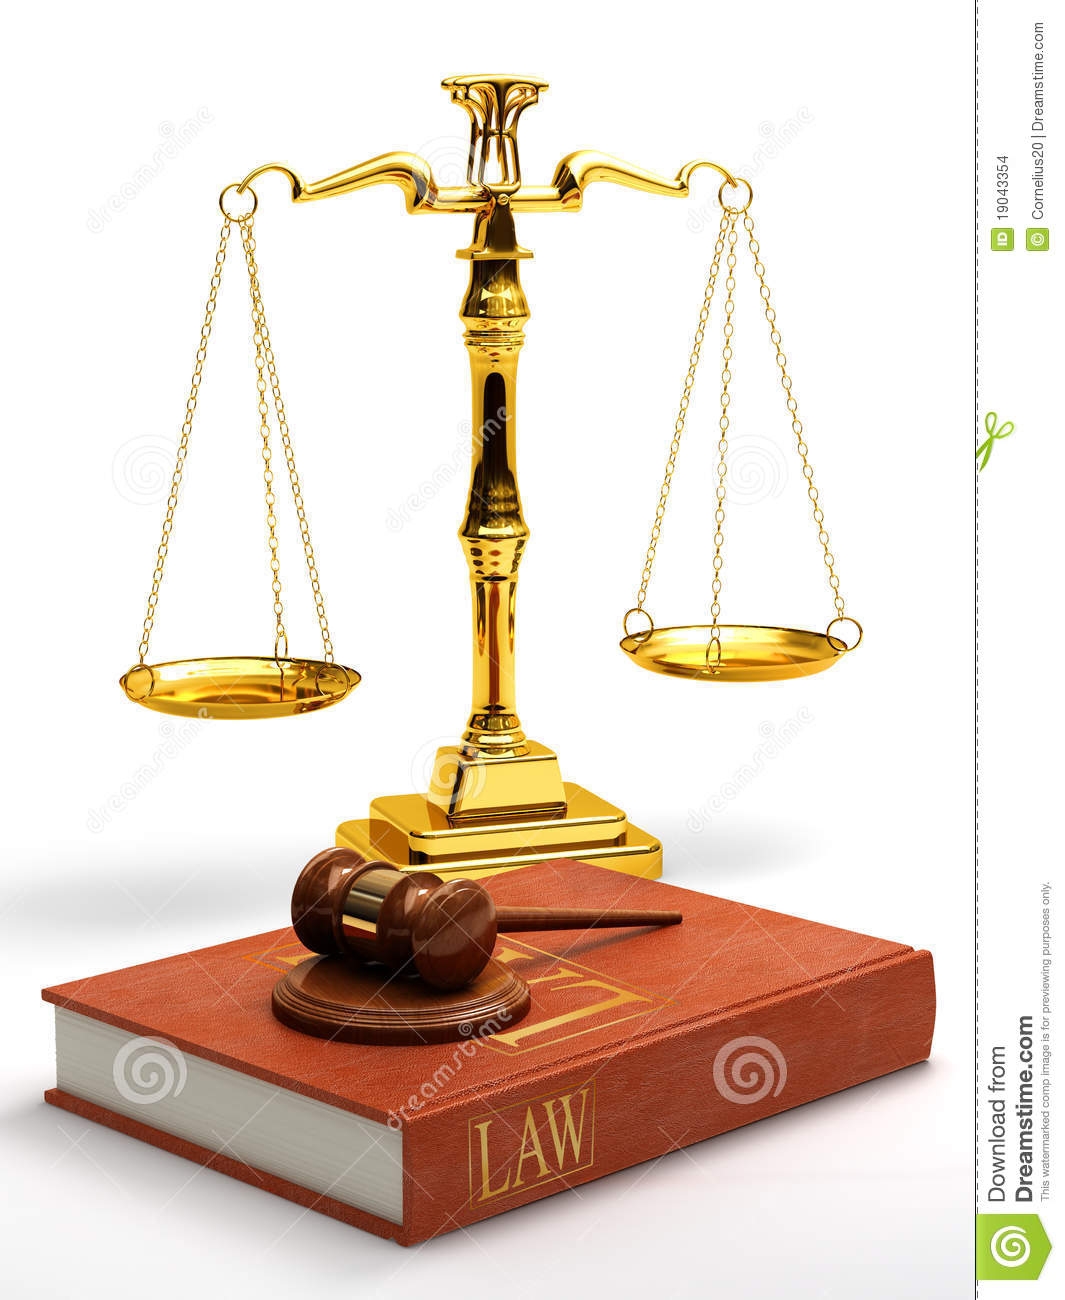 Gavel Scales And Law Book Stock Images   Image  19043354